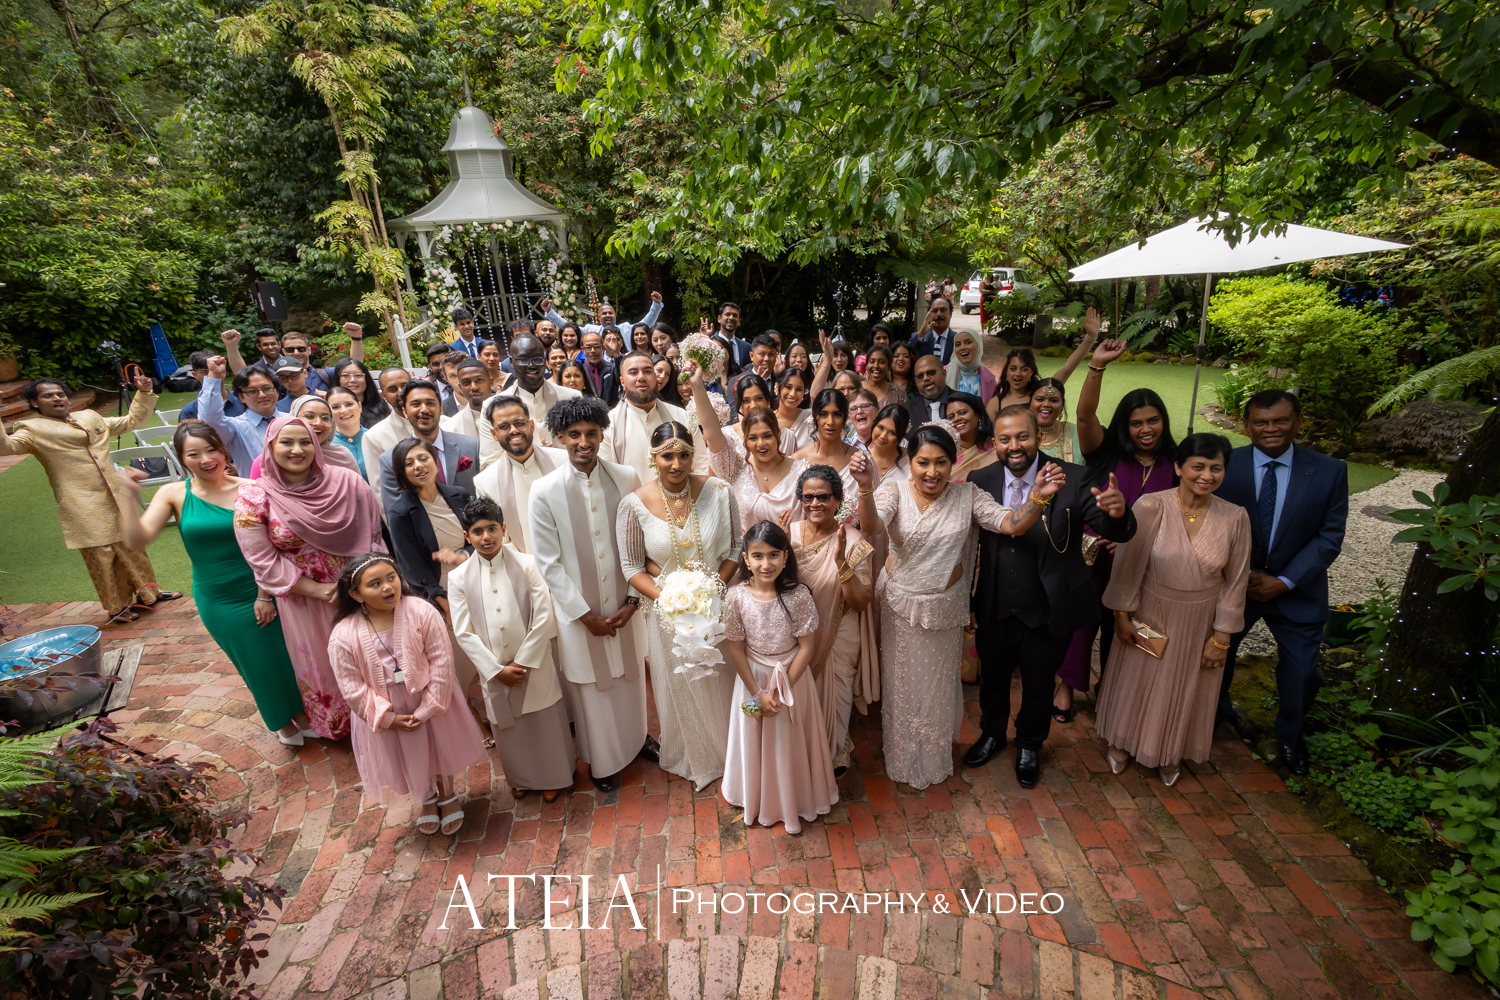 , Ransi and Isaac&#8217;s wedding photography at Lyrebird Falls captured by ATEIA Photography &#038; Video